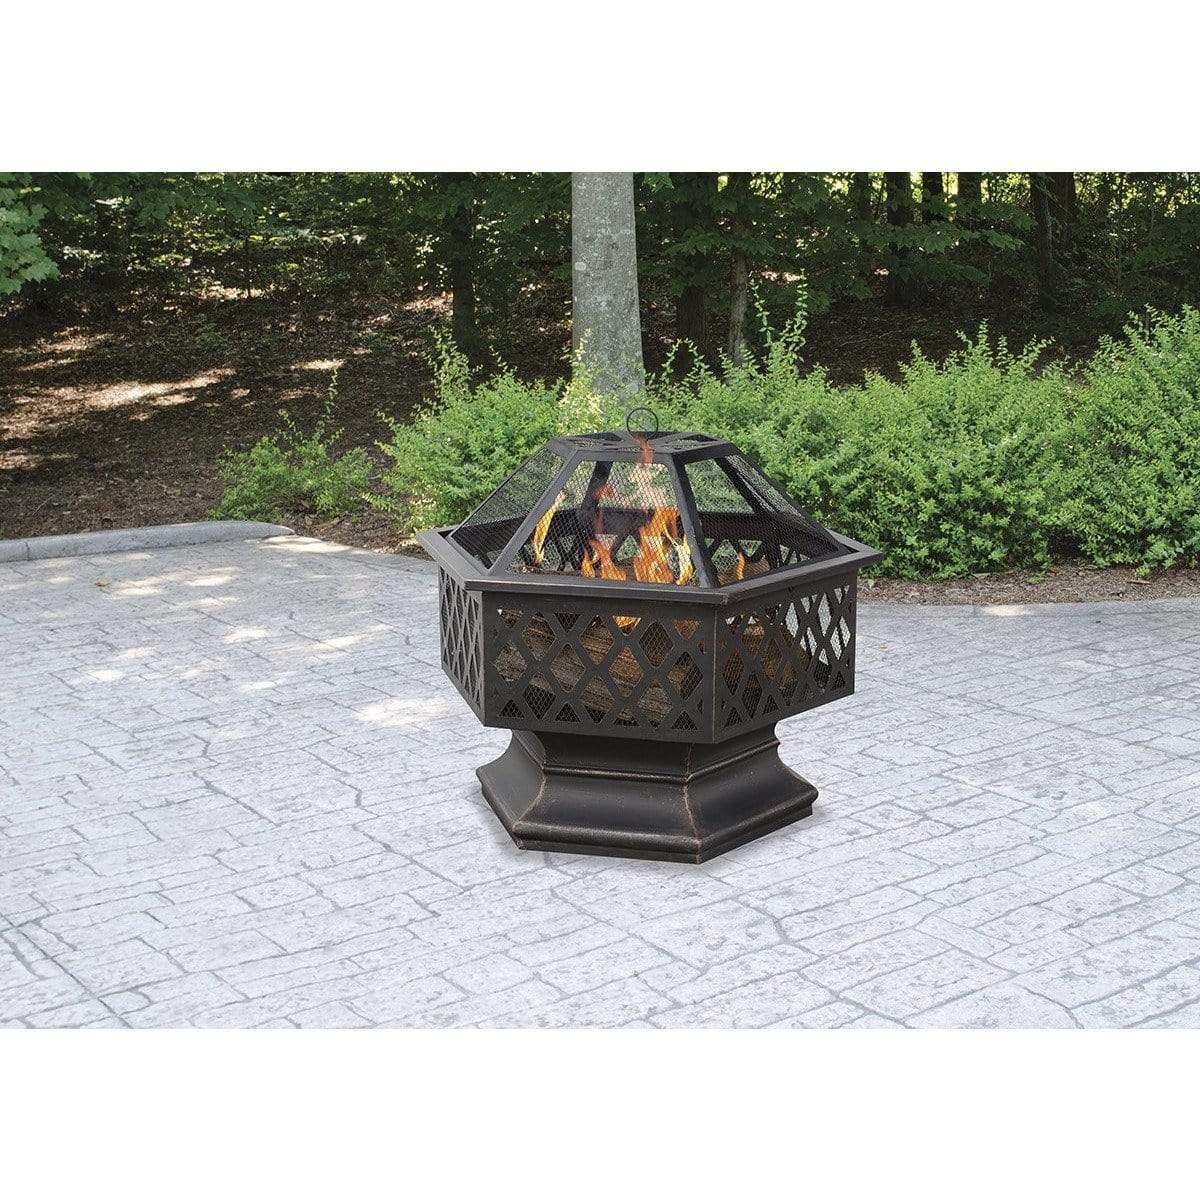 Endless Summer Oil Rubbed Bronze Wood Burning Outdoor Firebowl With Lattice Design - WAD1377SP - Fire Pit Stock